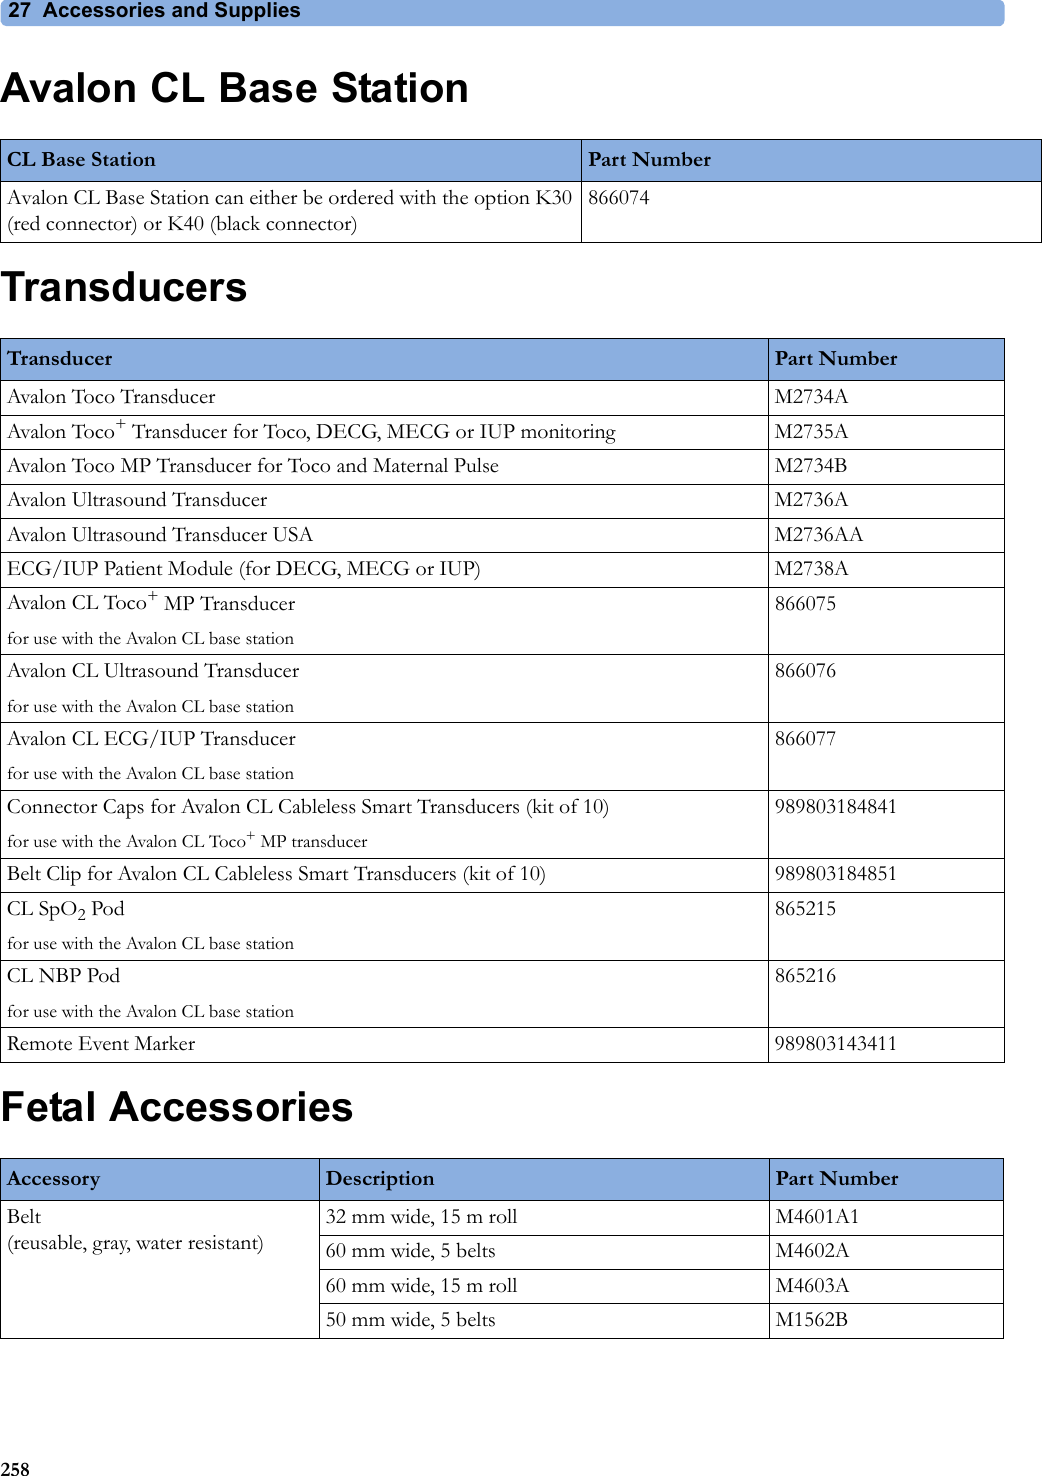 27 Accessories and Supplies258Avalon CL Base StationTransducersFetal AccessoriesCL Base Station Part NumberAvalon CL Base Station can either be ordered with the option K30 (red connector) or K40 (black connector)866074Transducer Part NumberAvalon Toco Transducer M2734AAvalon Toco+ Transducer for Toco, DECG, MECG or IUP monitoring M2735AAvalon Toco MP Transducer for Toco and Maternal Pulse M2734BAvalon Ultrasound Transducer M2736AAvalon Ultrasound Transducer USA M2736AAECG/IUP Patient Module (for DECG, MECG or IUP) M2738AAvalon CL Toco+ MP Transducerfor use with the Avalon CL base station866075Avalon CL Ultrasound Transducerfor use with the Avalon CL base station866076Avalon CL ECG/IUP Transducerfor use with the Avalon CL base station866077Connector Caps for Avalon CL Cableless Smart Transducers (kit of 10)for use with the Avalon CL Toco+ MP transducer989803184841Belt Clip for Avalon CL Cableless Smart Transducers (kit of 10) 989803184851CL SpO2 Podfor use with the Avalon CL base station865215CL NBP Podfor use with the Avalon CL base station865216Remote Event Marker 989803143411Accessory Description Part NumberBelt(reusable, gray, water resistant)32 mm wide, 15 m roll M4601A160 mm wide, 5 belts M4602A60 mm wide, 15 m roll M4603A50 mm wide, 5 belts M1562B